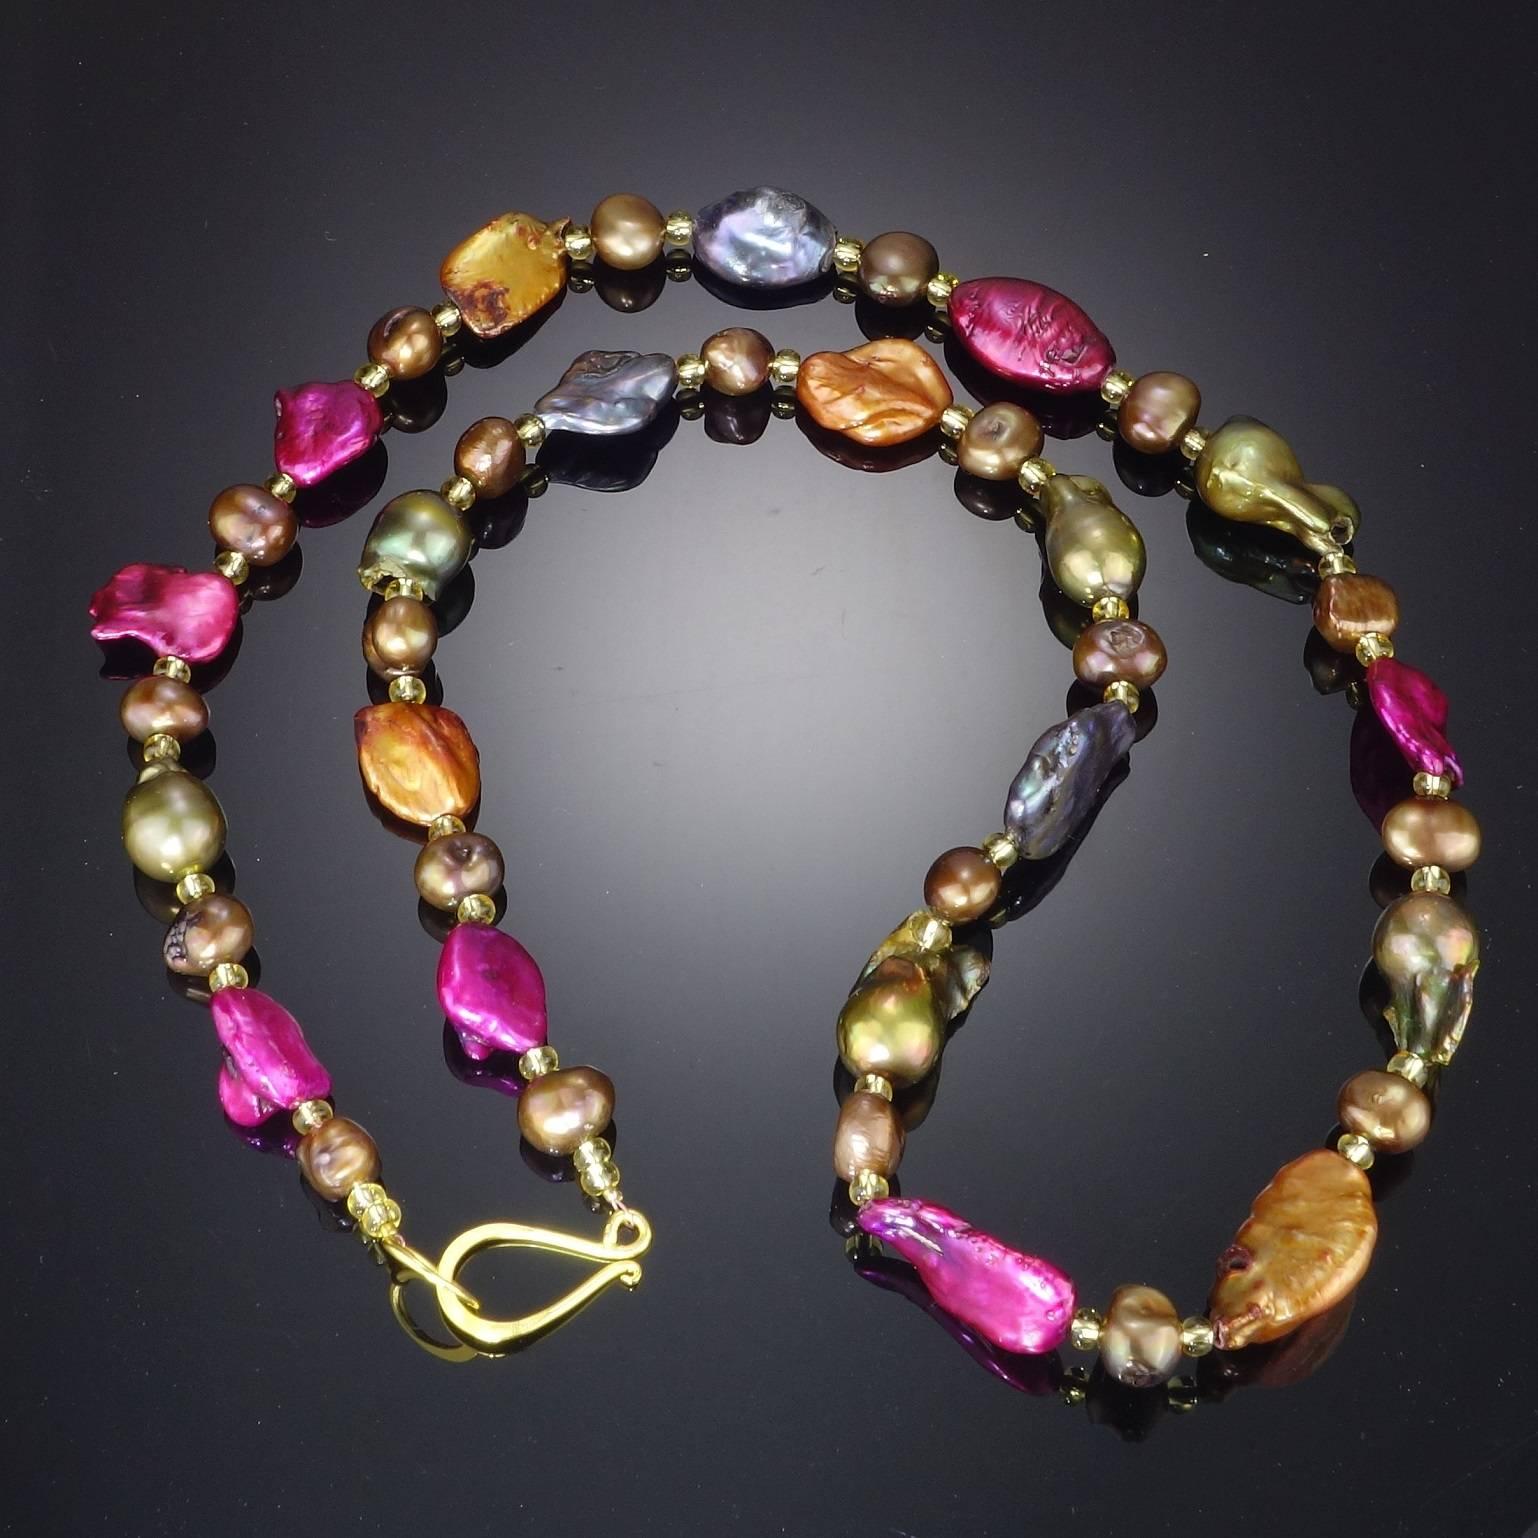 Custom made, Jewel Tone Baroque Pearl Necklace enhanced with brown pearls and gold czech beads.  This is a Statement Necklace to wear when you want to feel great.  The Baroque Pearls are a variety of deep jewel tones and unusual shapes.  Unique. 